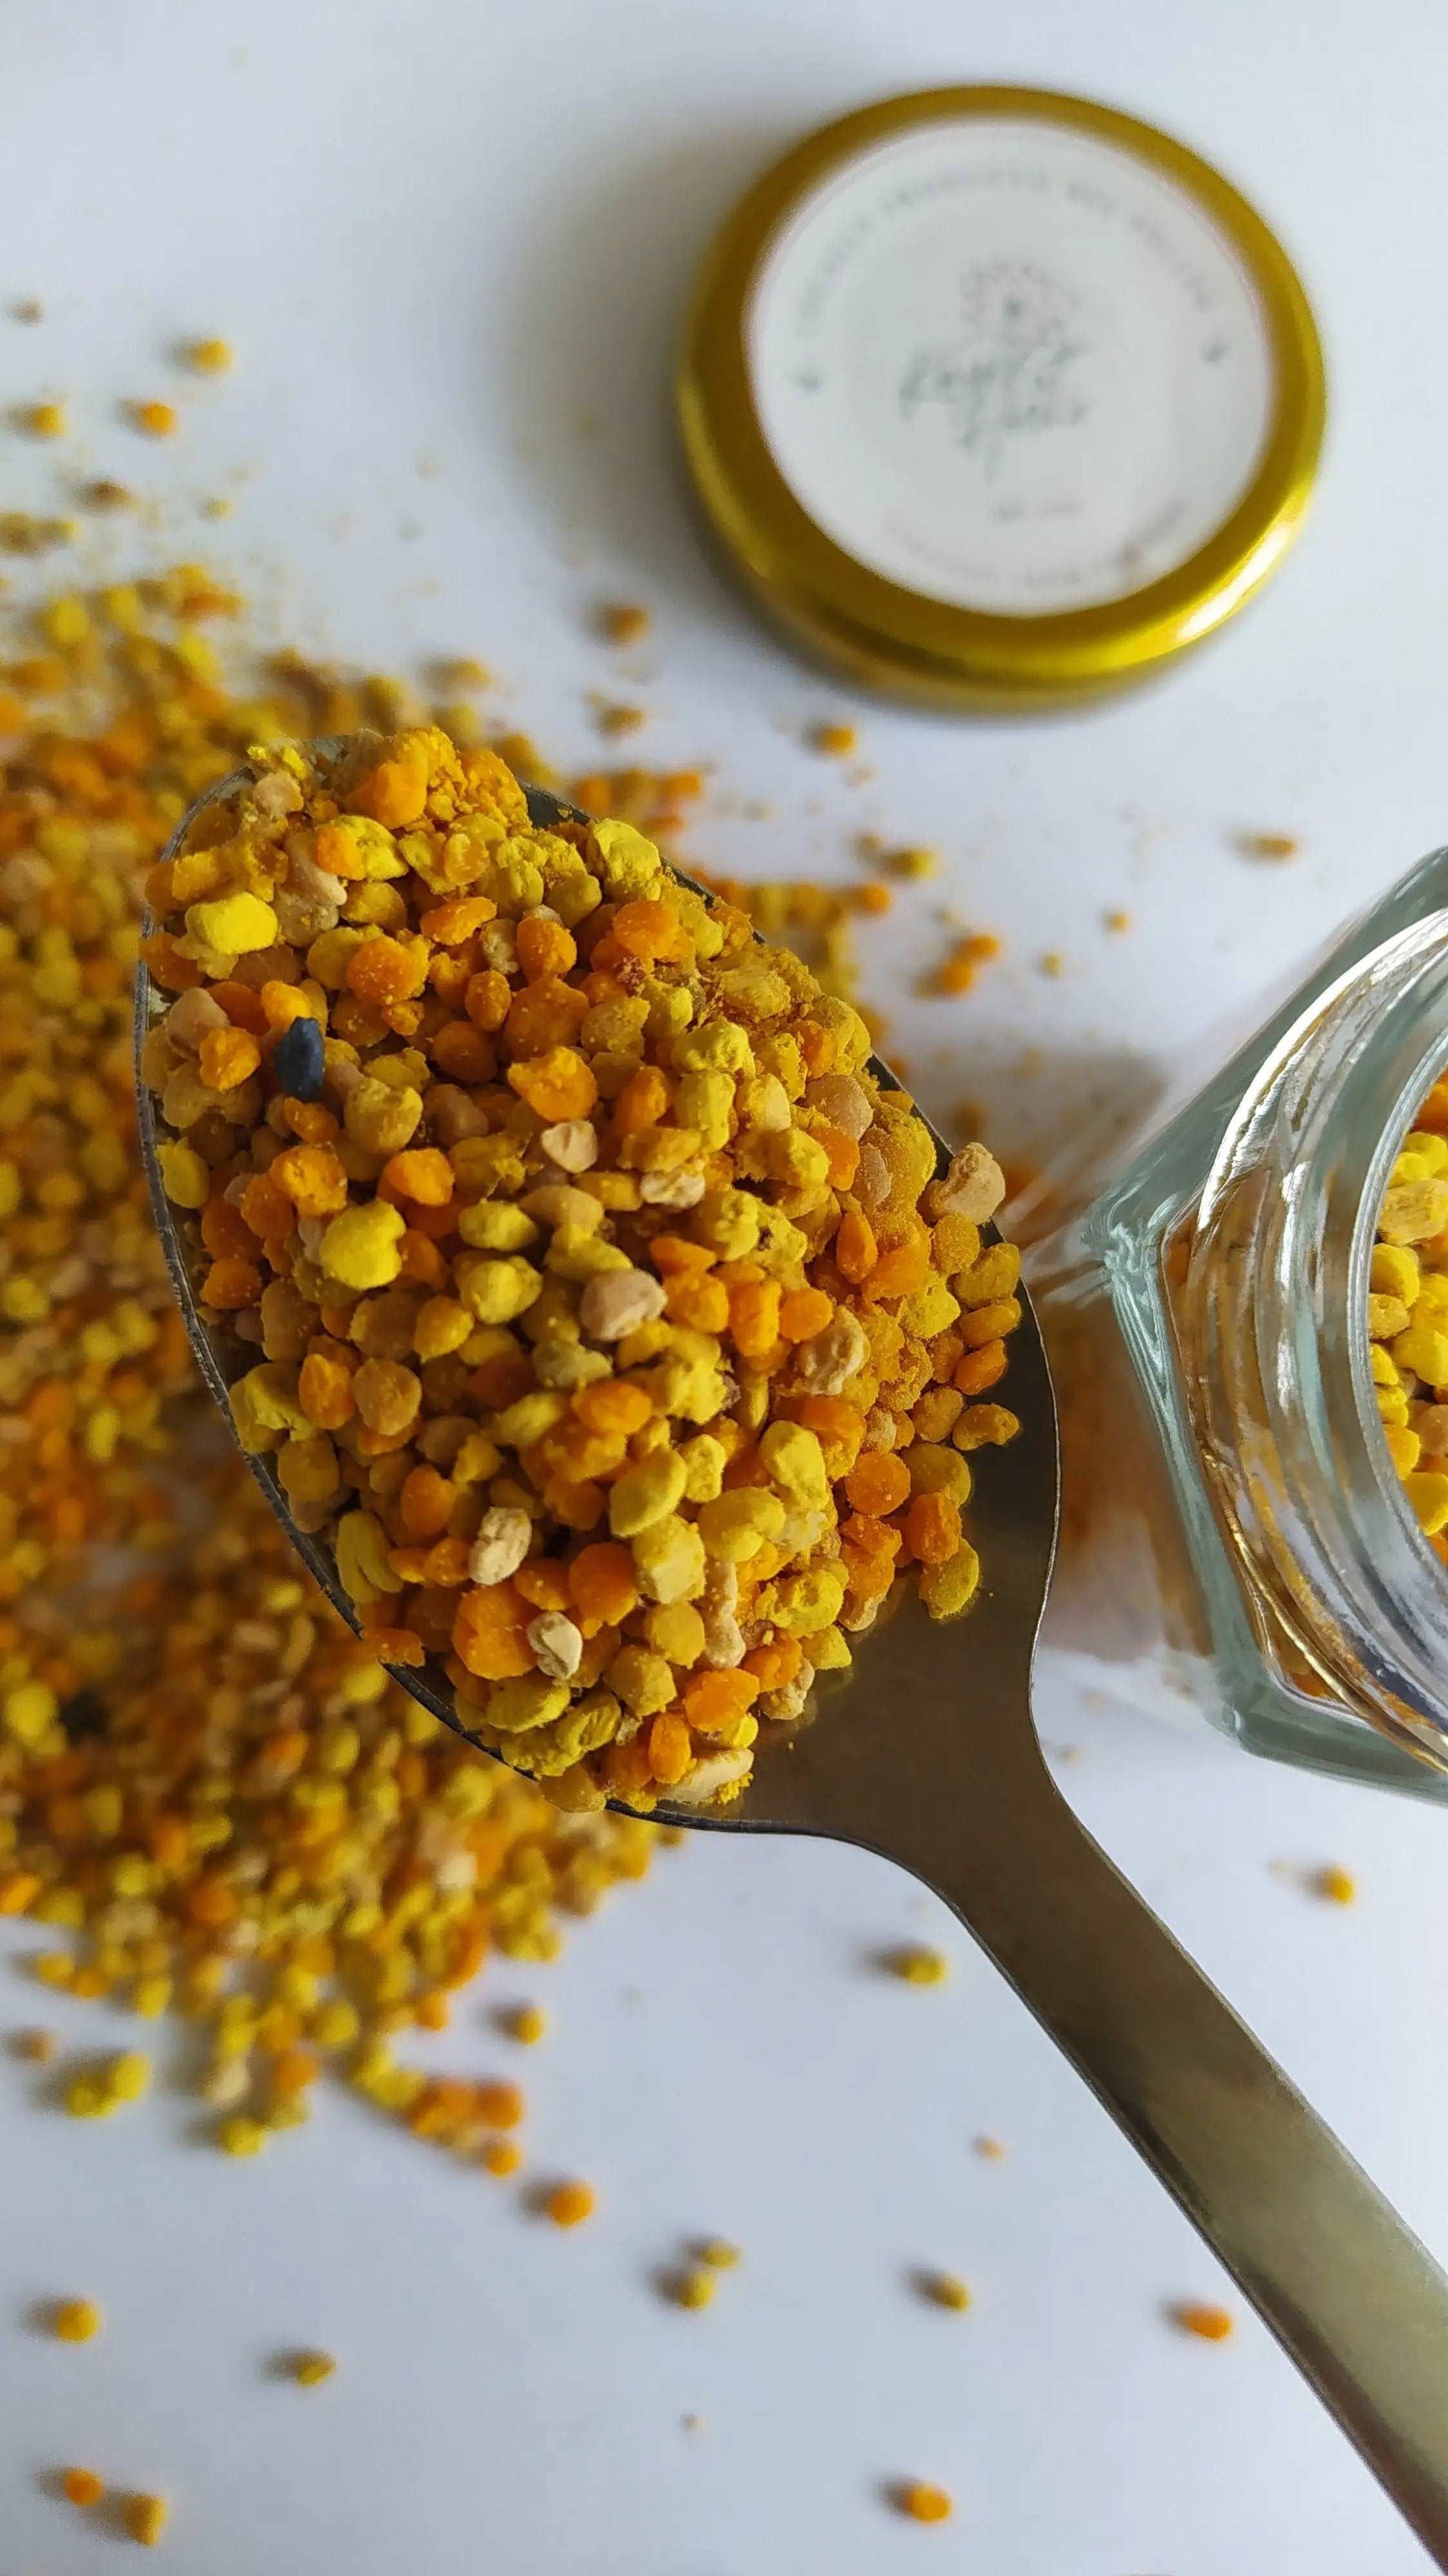 a spoon full of yellow corn next to a jar of mustard